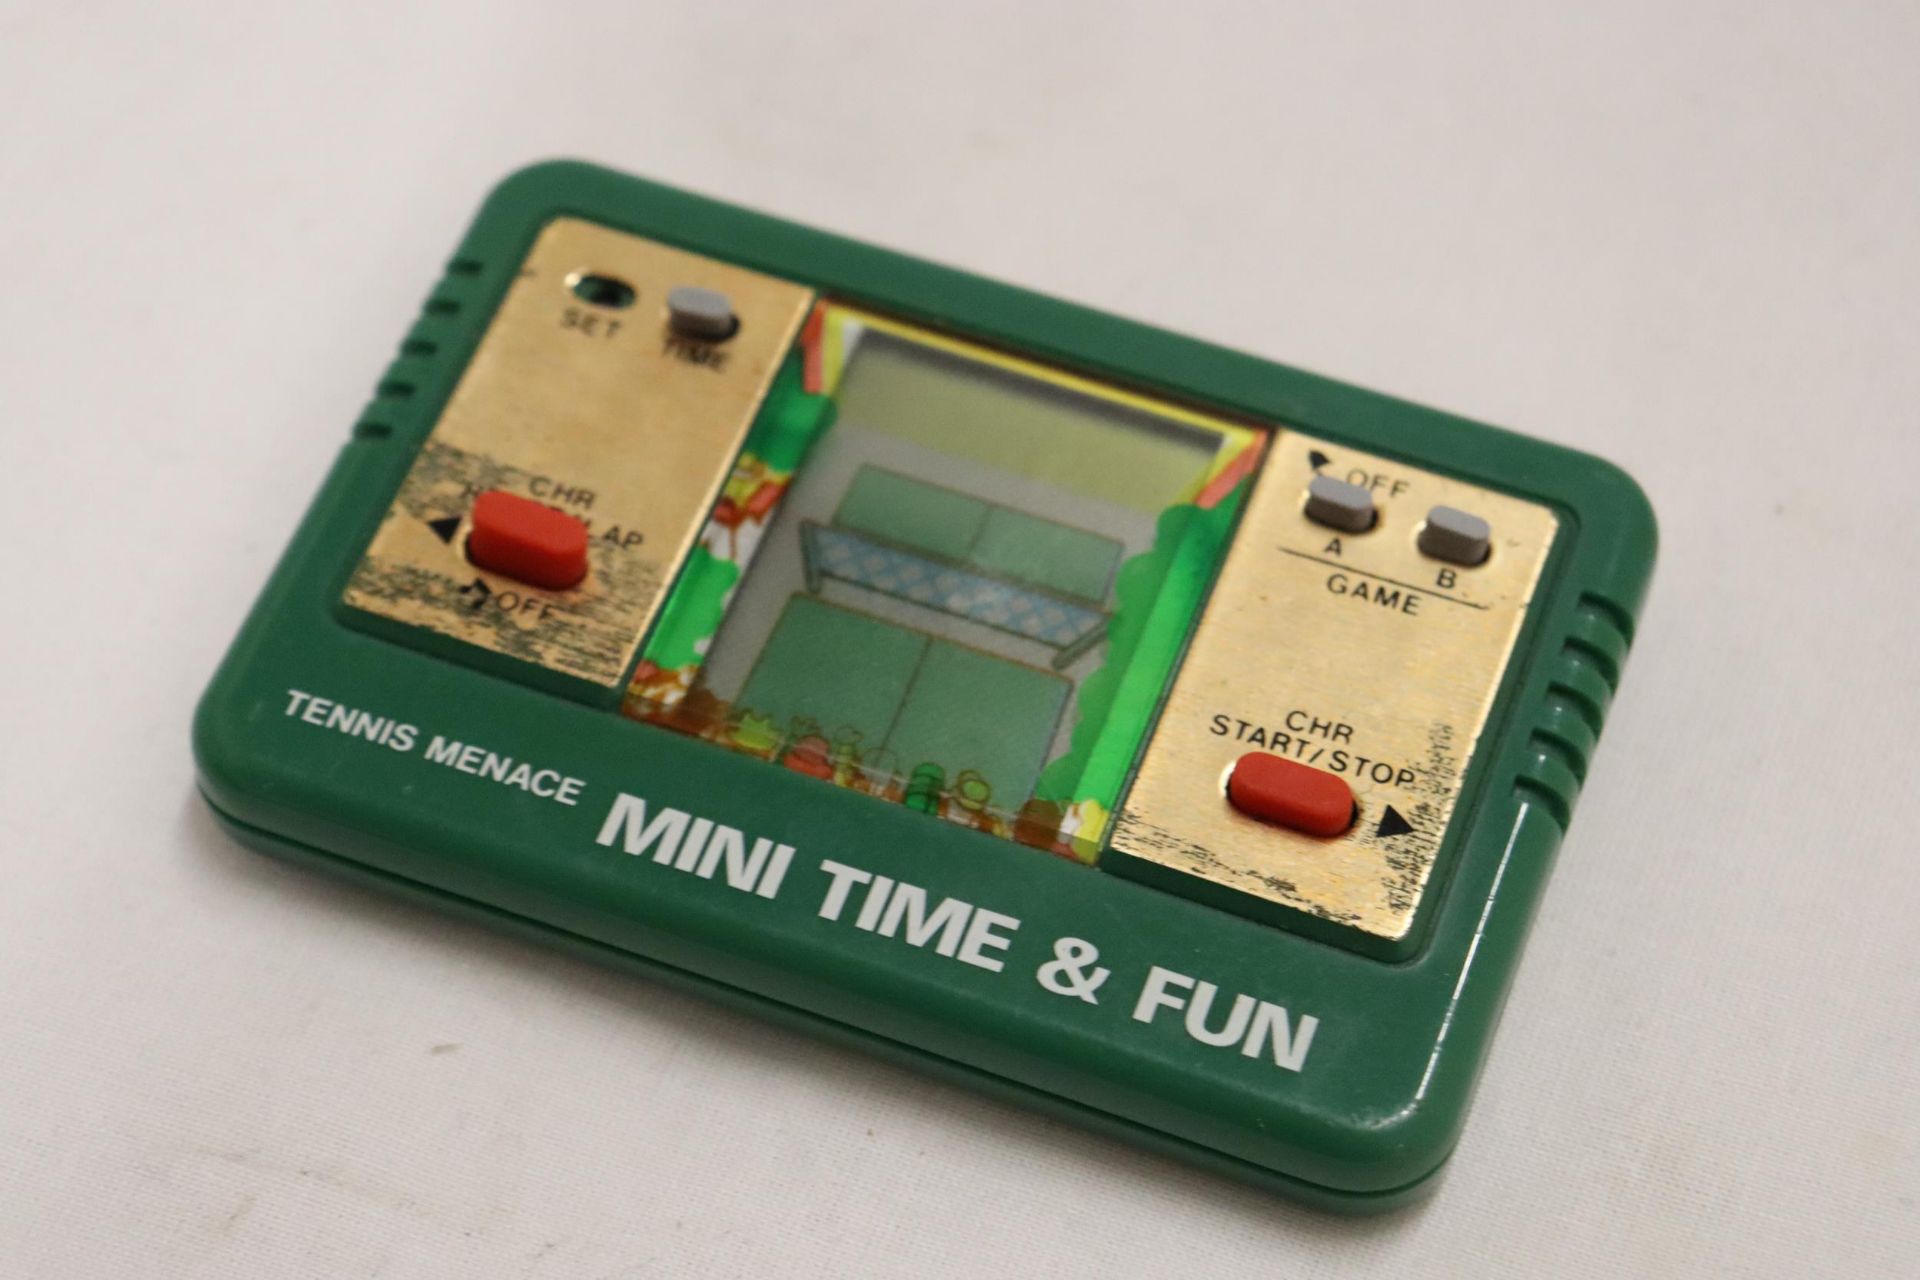 A VINTAGE HAND HELD 1980'S, TENNIS MENACE MINI TIME AND FUN, WORKING AT TIME OF CATALOGUING, NO - Image 5 of 5